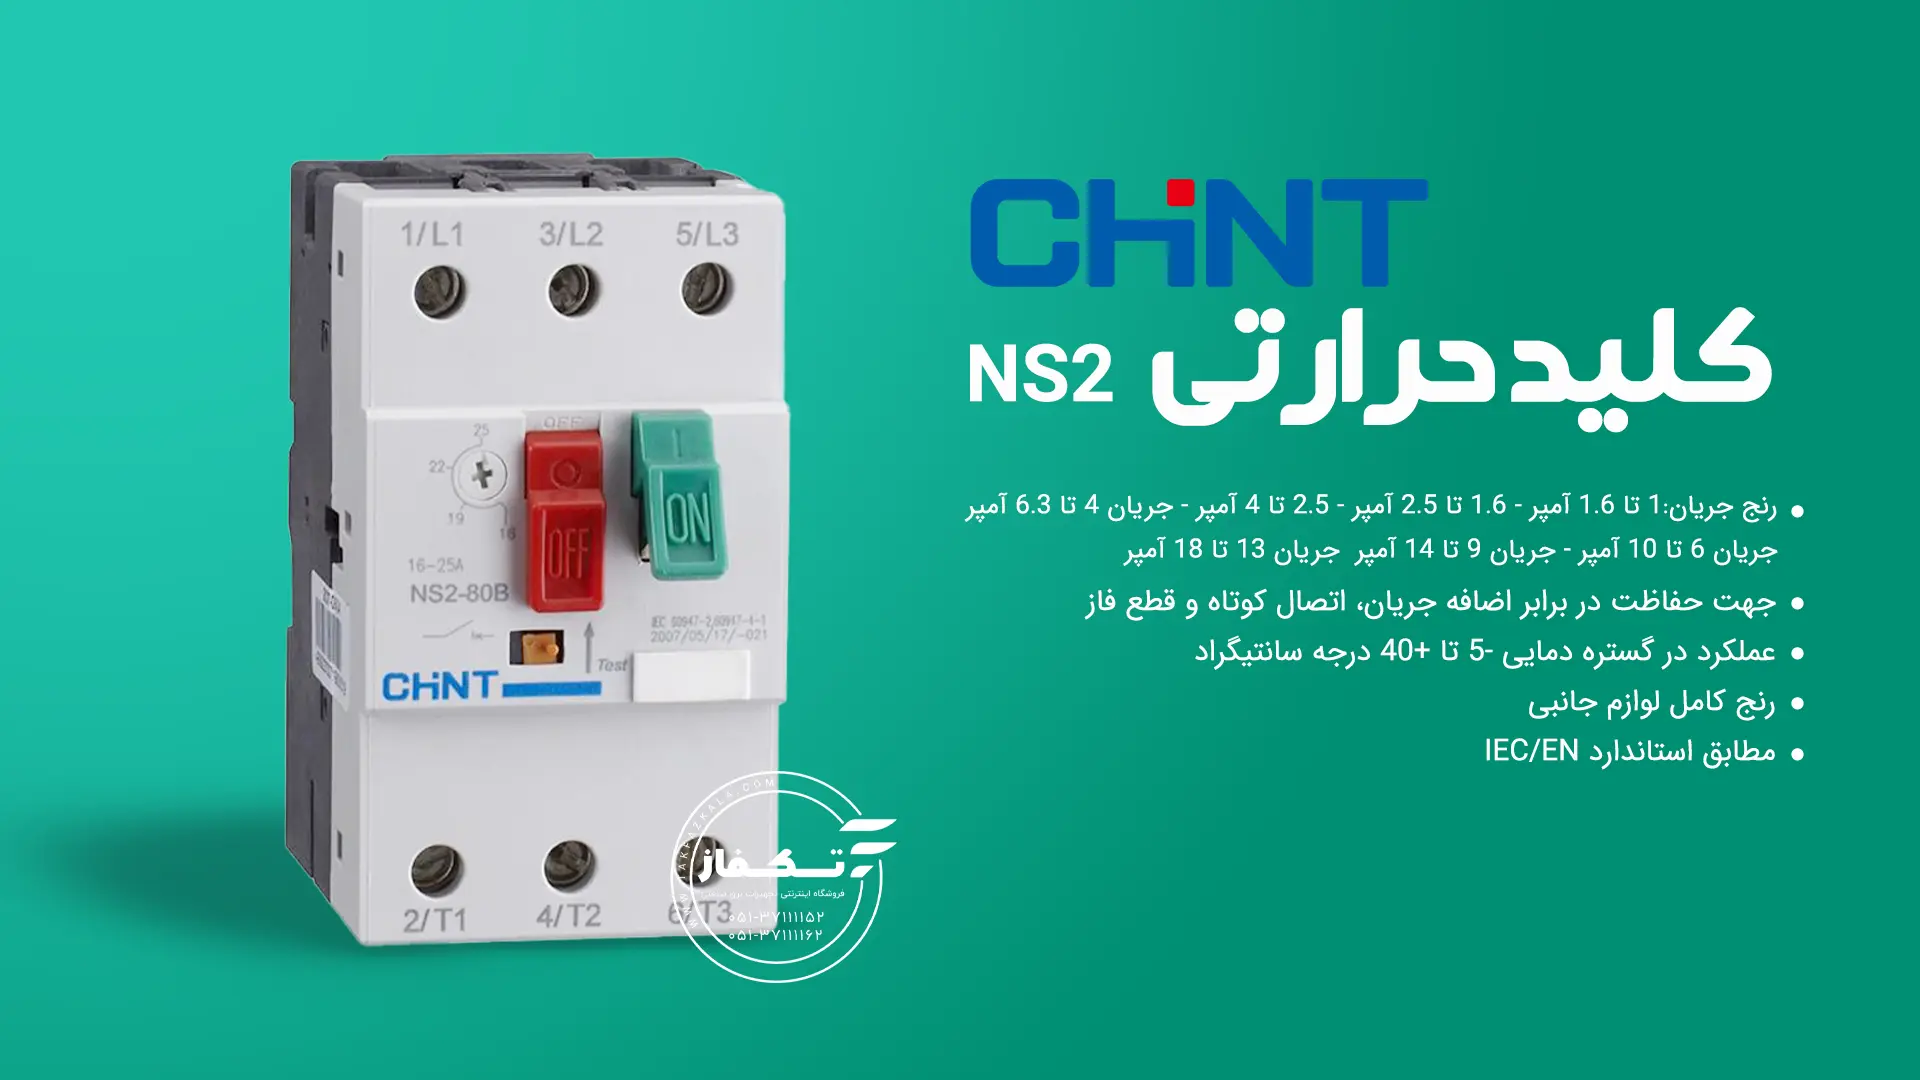 Thermal switch NS2 current 1.6 to 2.5 amps